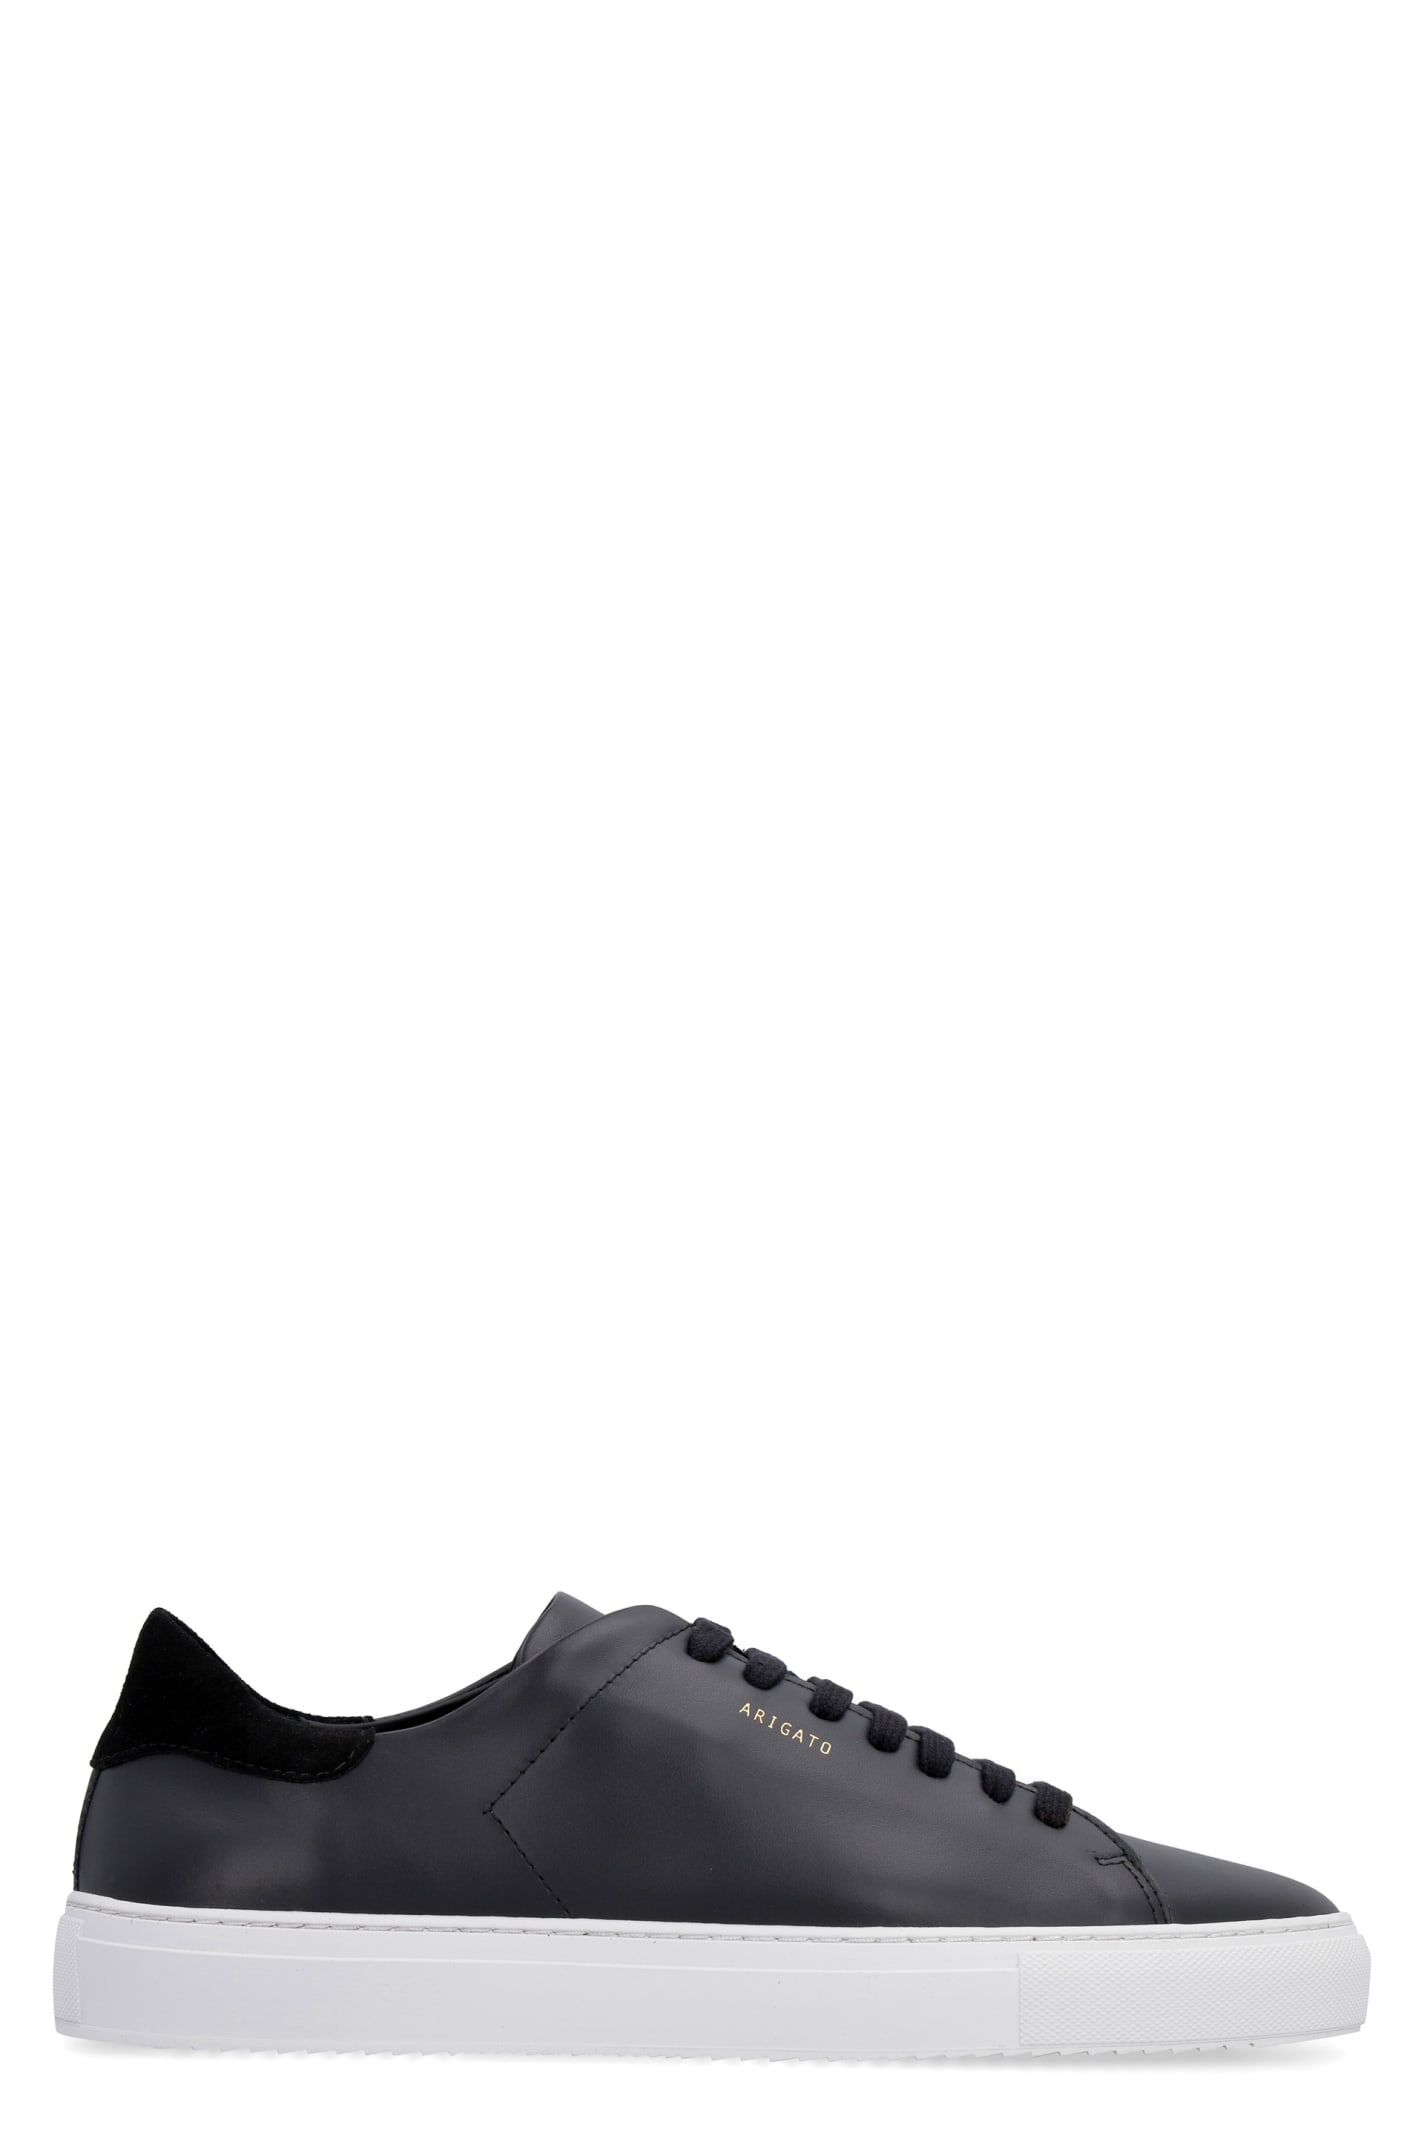 Axel Arigato Clean 90 Leather Low-top Sneakers